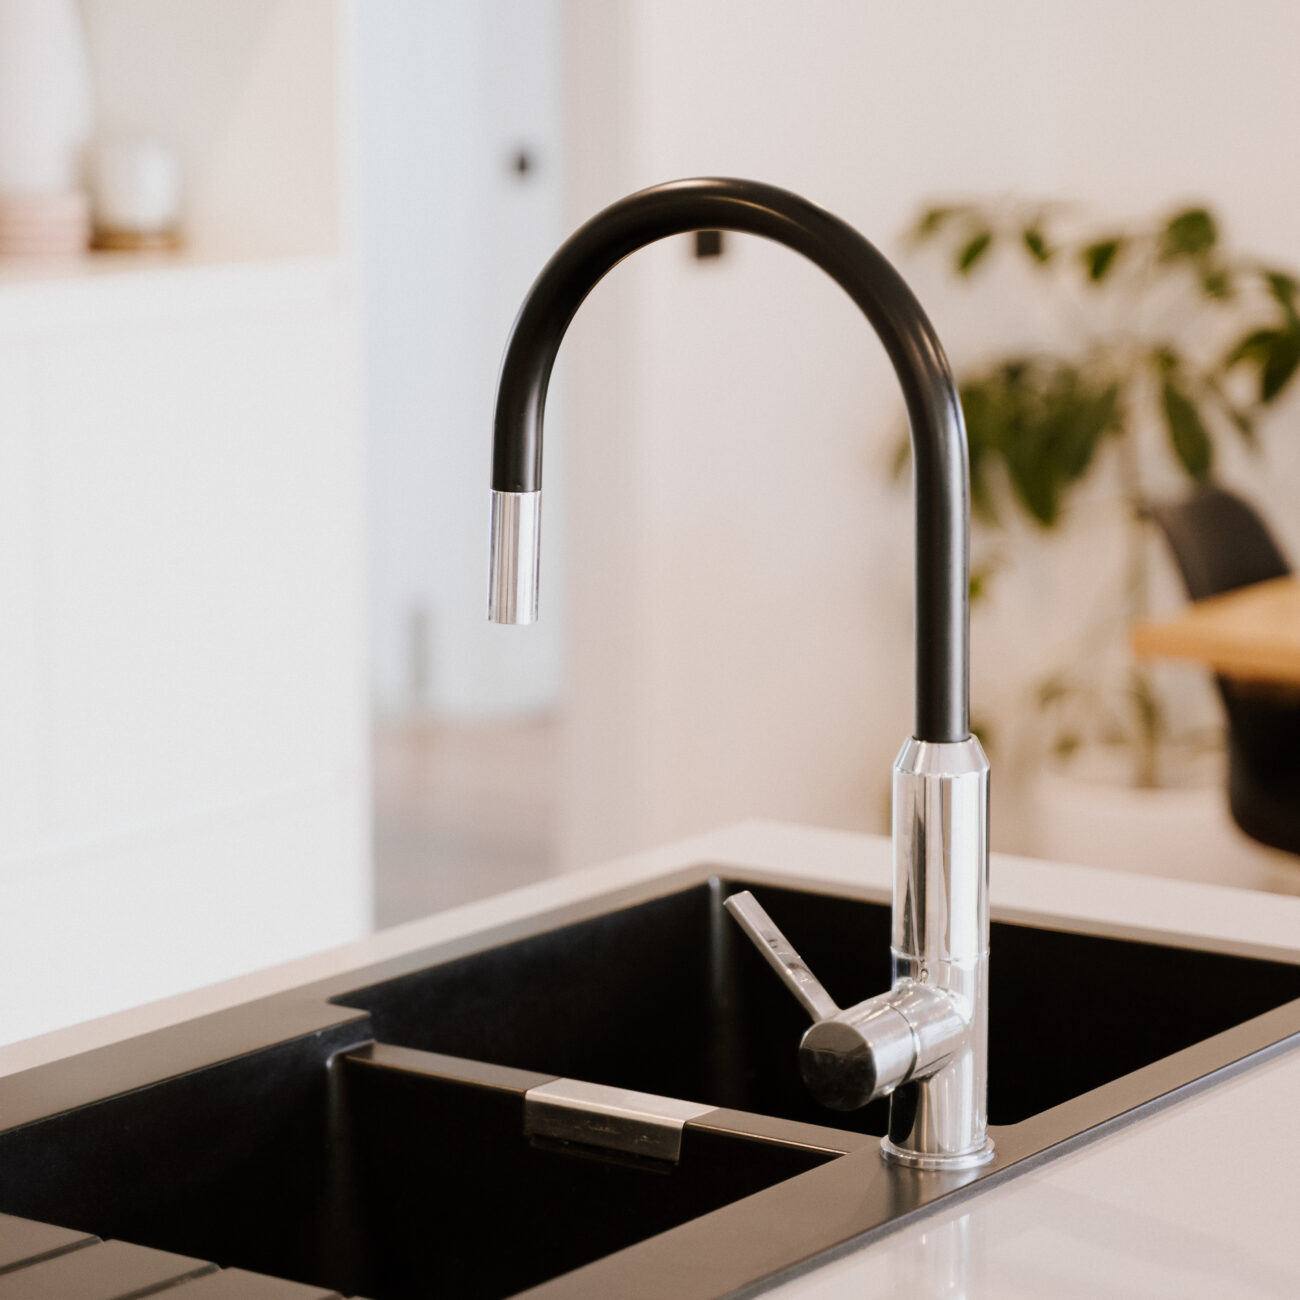 The beautiful modern style black faucet with steel sink in the kitchen